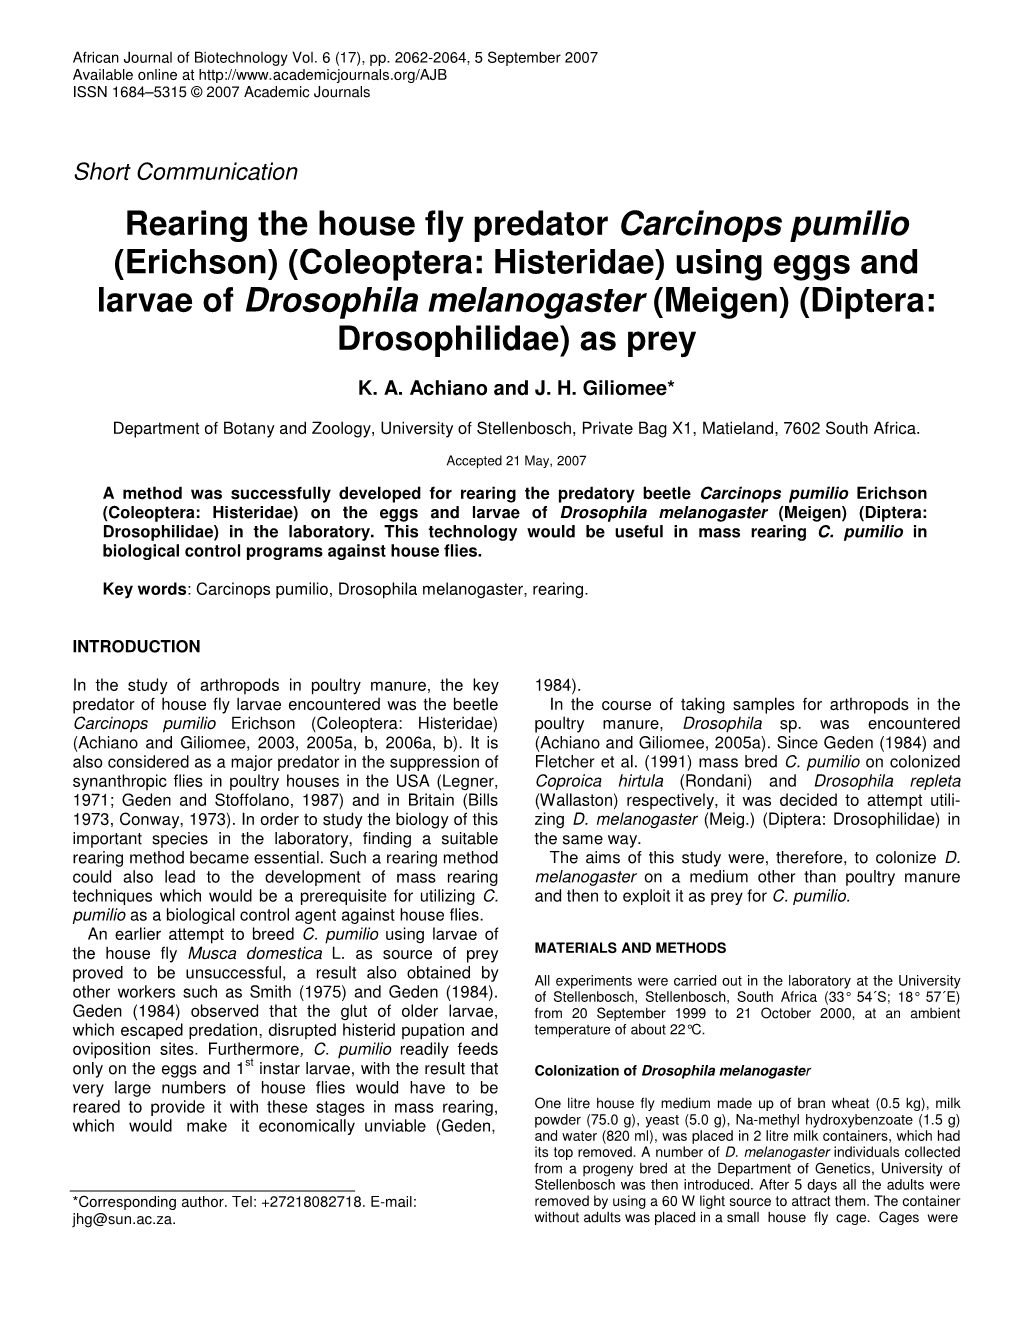 Rearing the House Fly Predator Carcinops